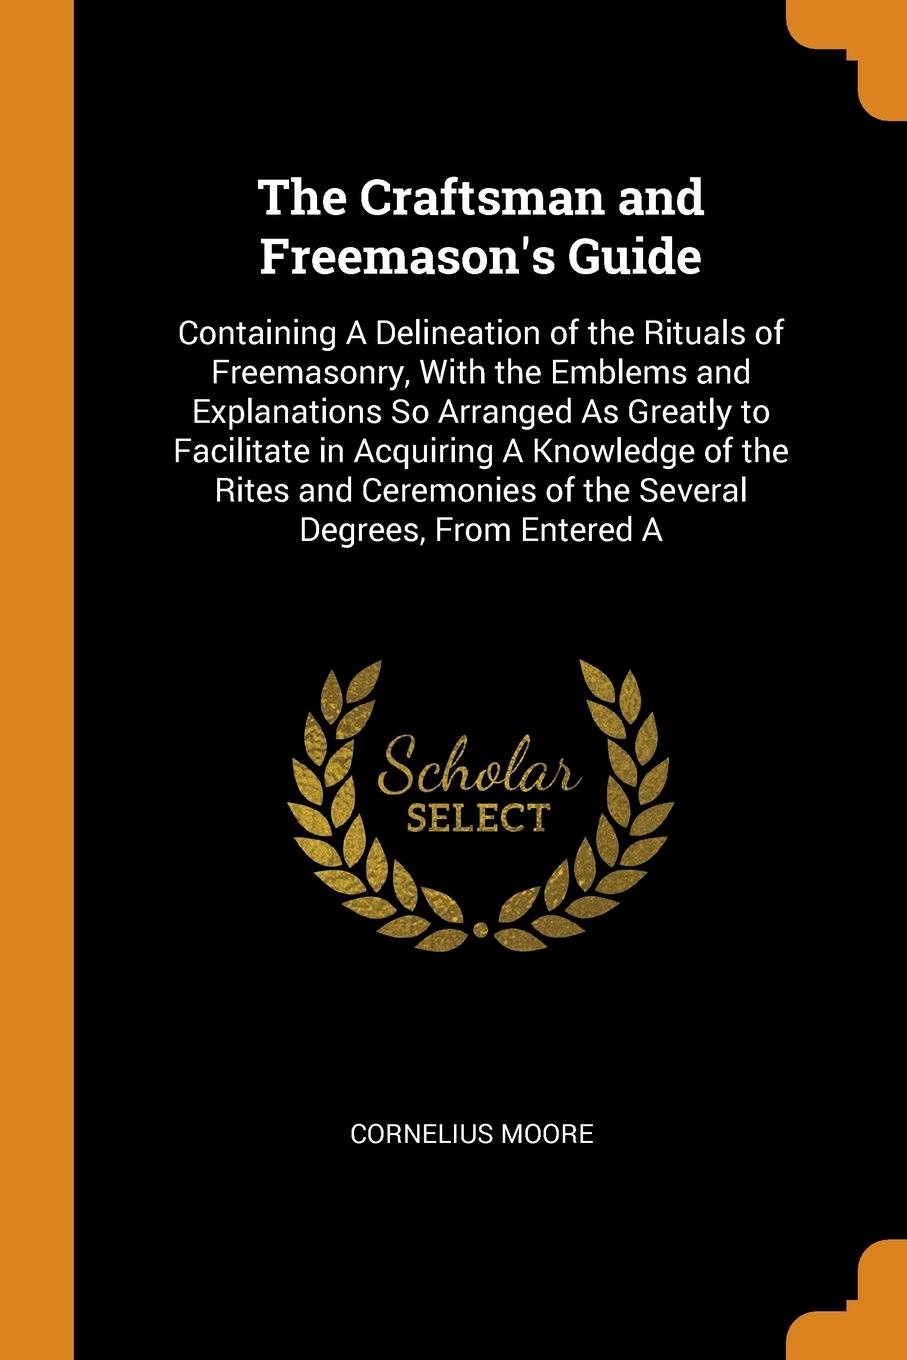 The Craftsman and Freemason`s Guide. Containing A Delineation of the Rituals of Freemasonry, With the Emblems and Explanations So Arranged As Greatly to Facilitate in Acquiring A Knowledge of the Rites and Ceremonies of the Several Degrees, From E...